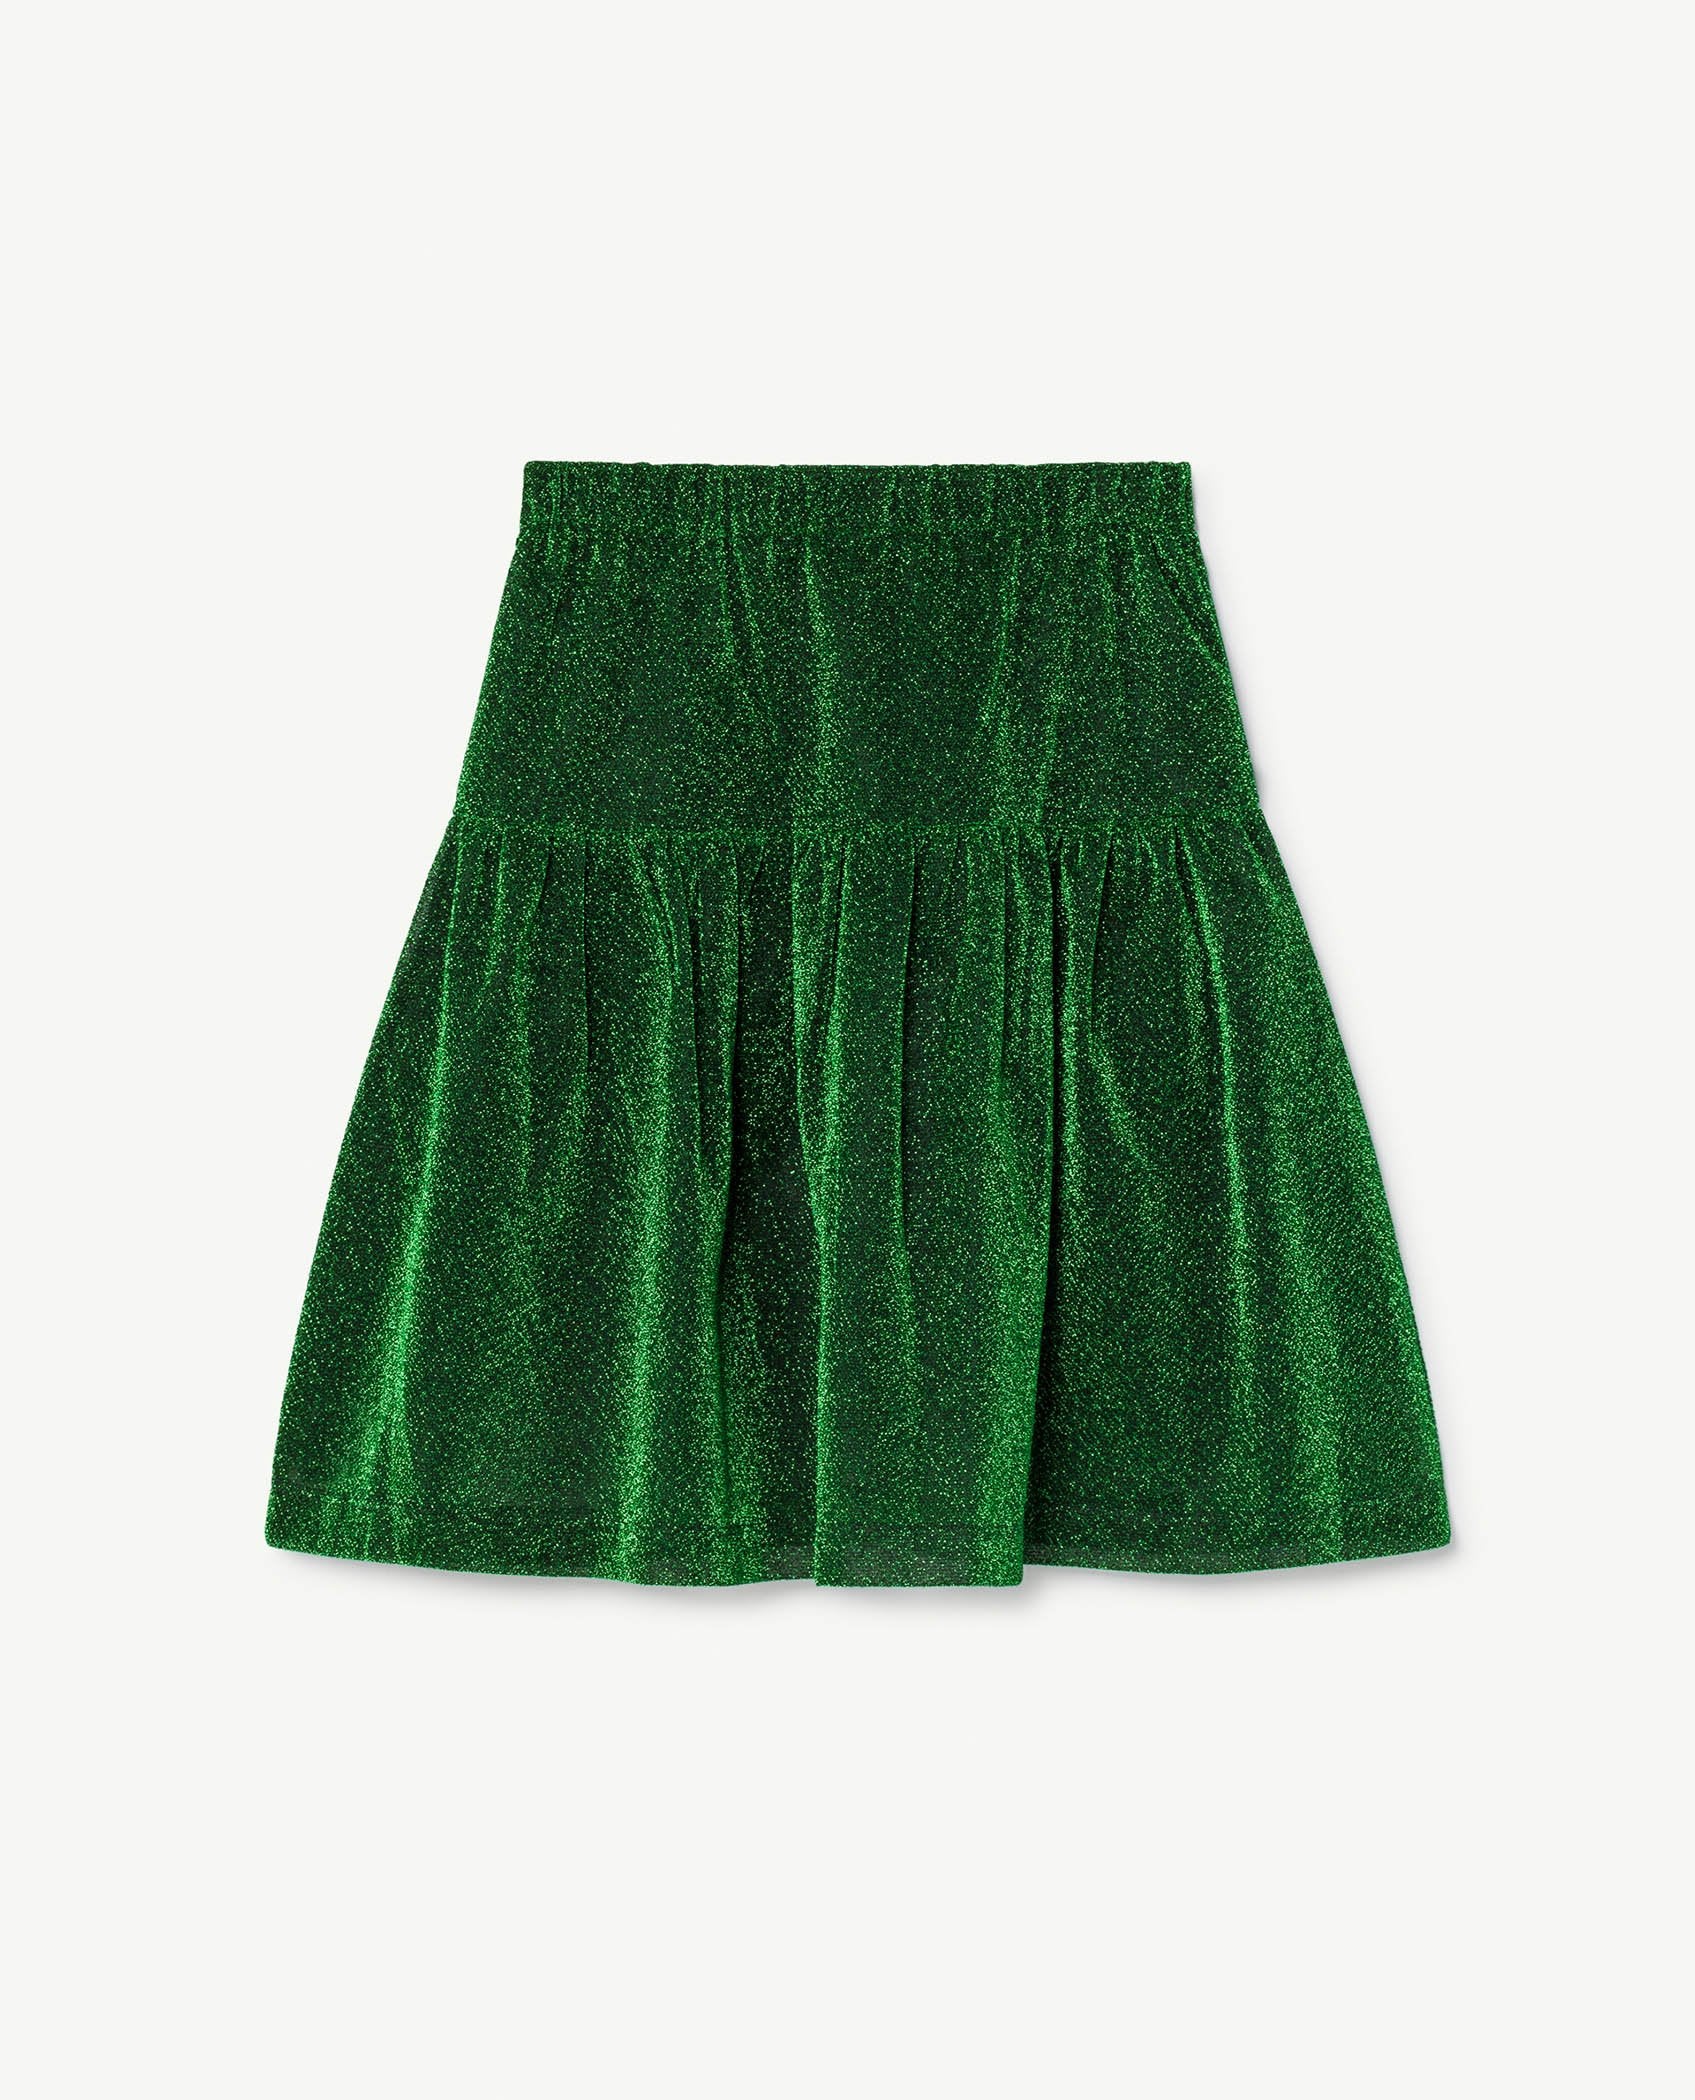 Electric Green Turkey Skirt PRODUCT BACK